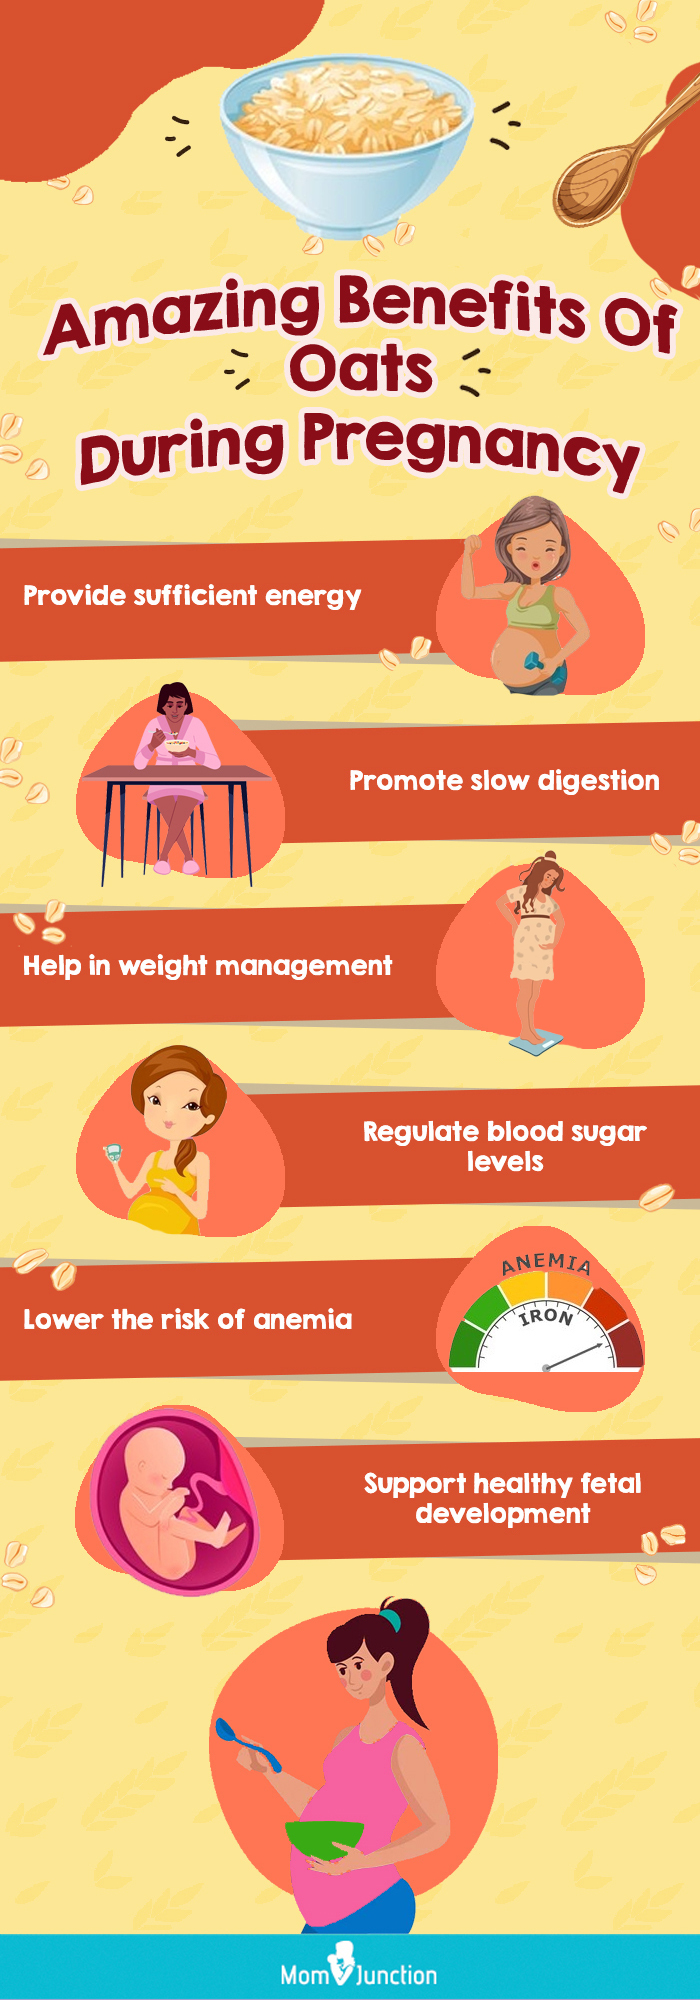 amazing benefits of oats during pregnancy [infographic]